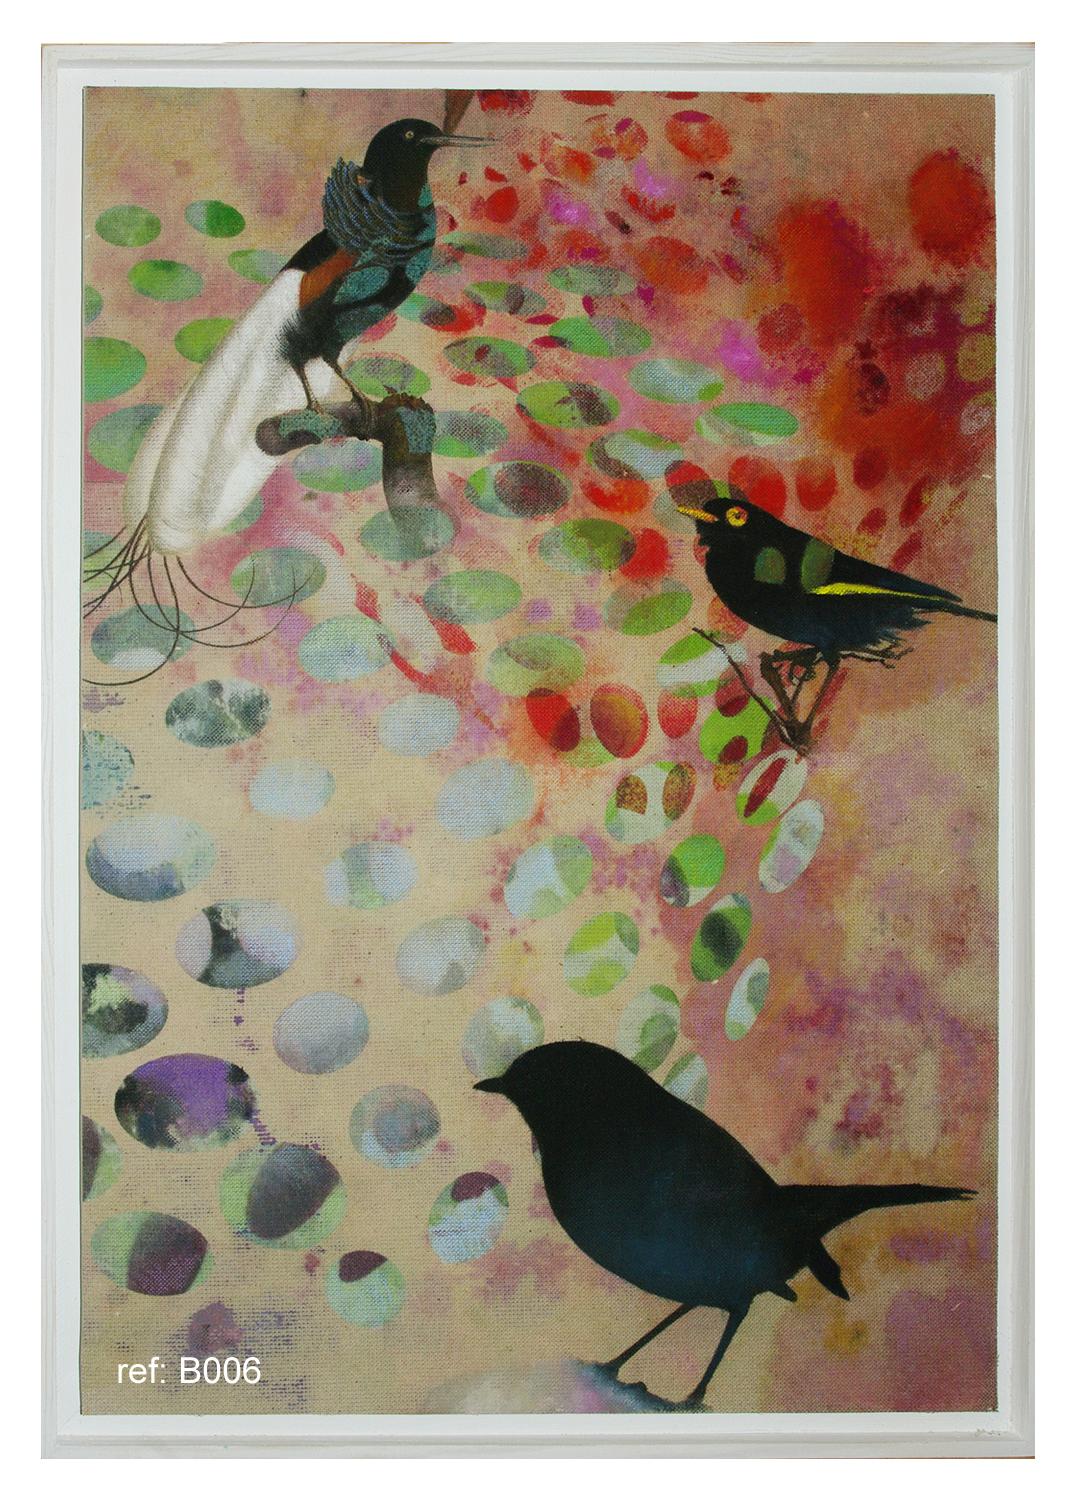 Francisco Nicolás Abstract Painting - Birds 018- Contemporary, Abstract, Expressionist, Modern, Street art, Surrealist